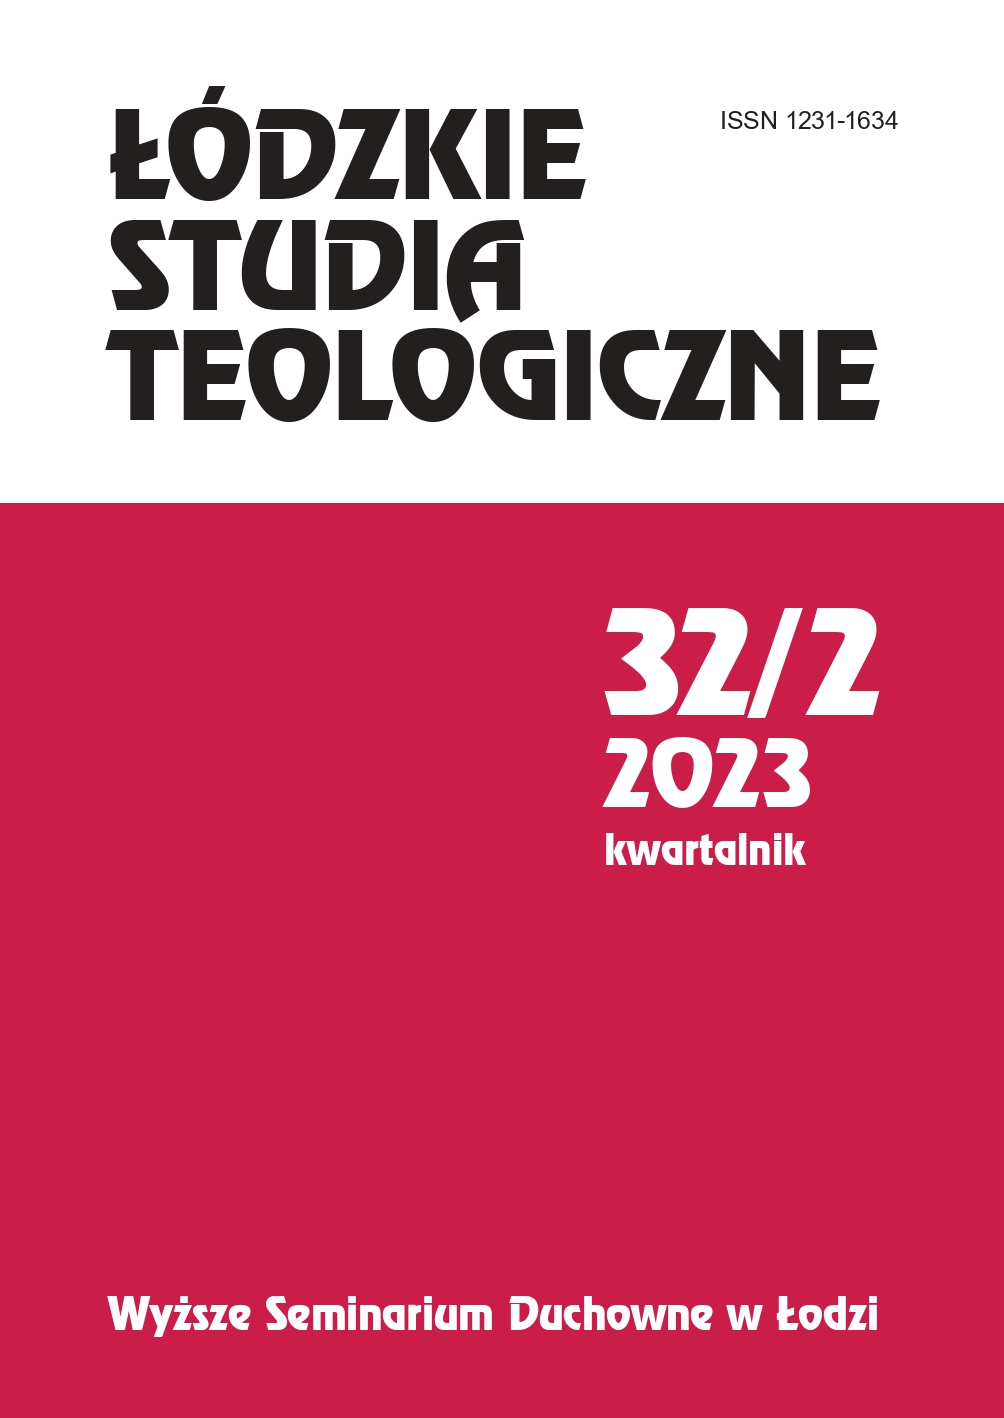 Institute of Media Education and Journalism UKSW in Warsaw – selected reflections on the 20th anniversary of the Institute Cover Image